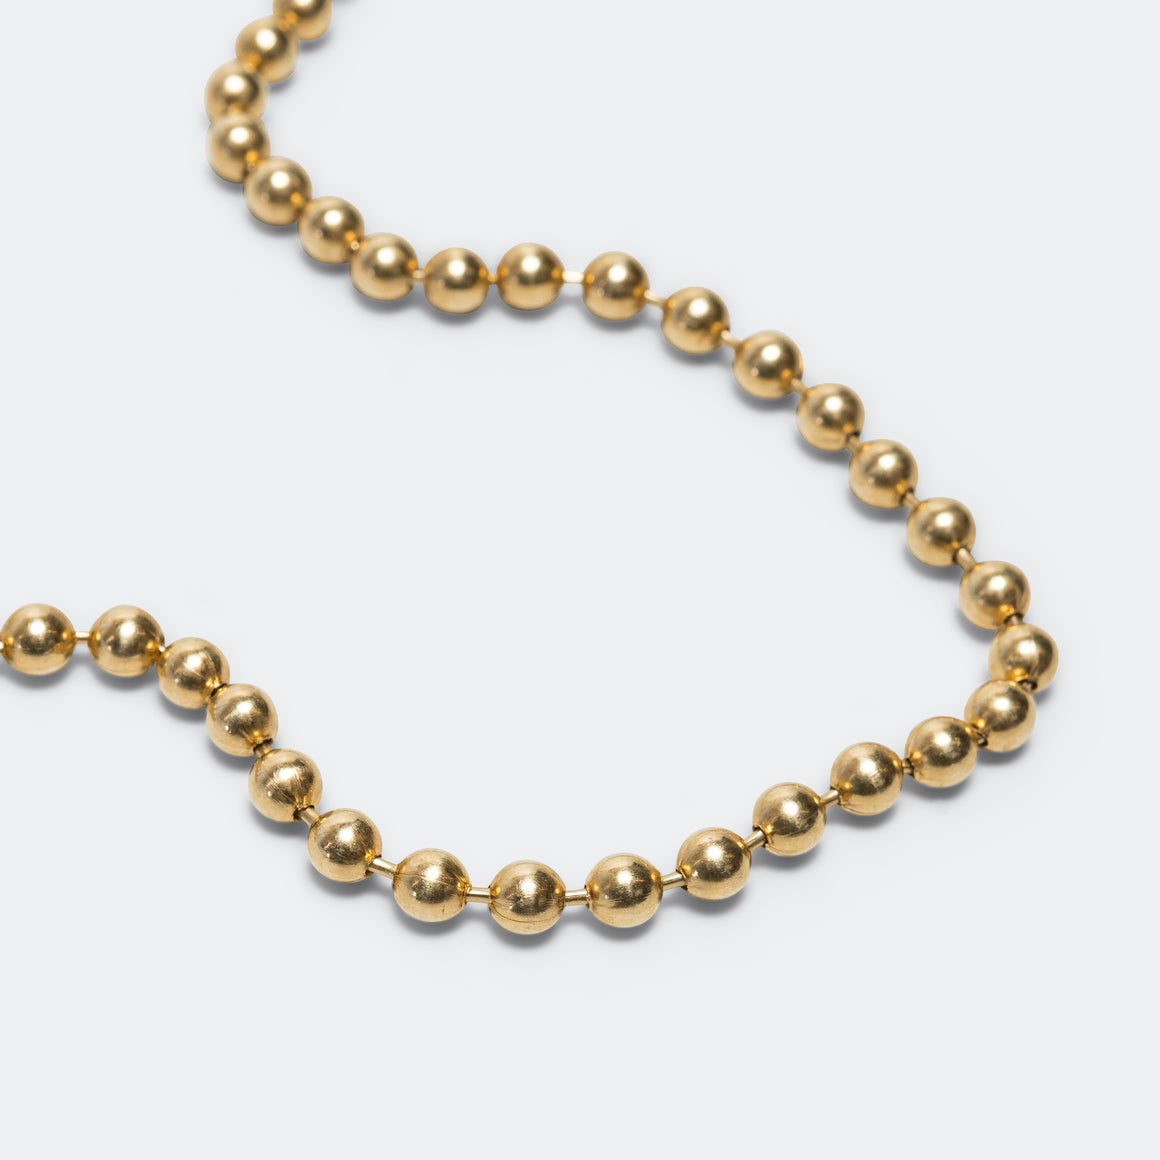 Good Art Hlywd - Ball Chain Necklace Goosebumps - A - 18K Gold - UP THERE